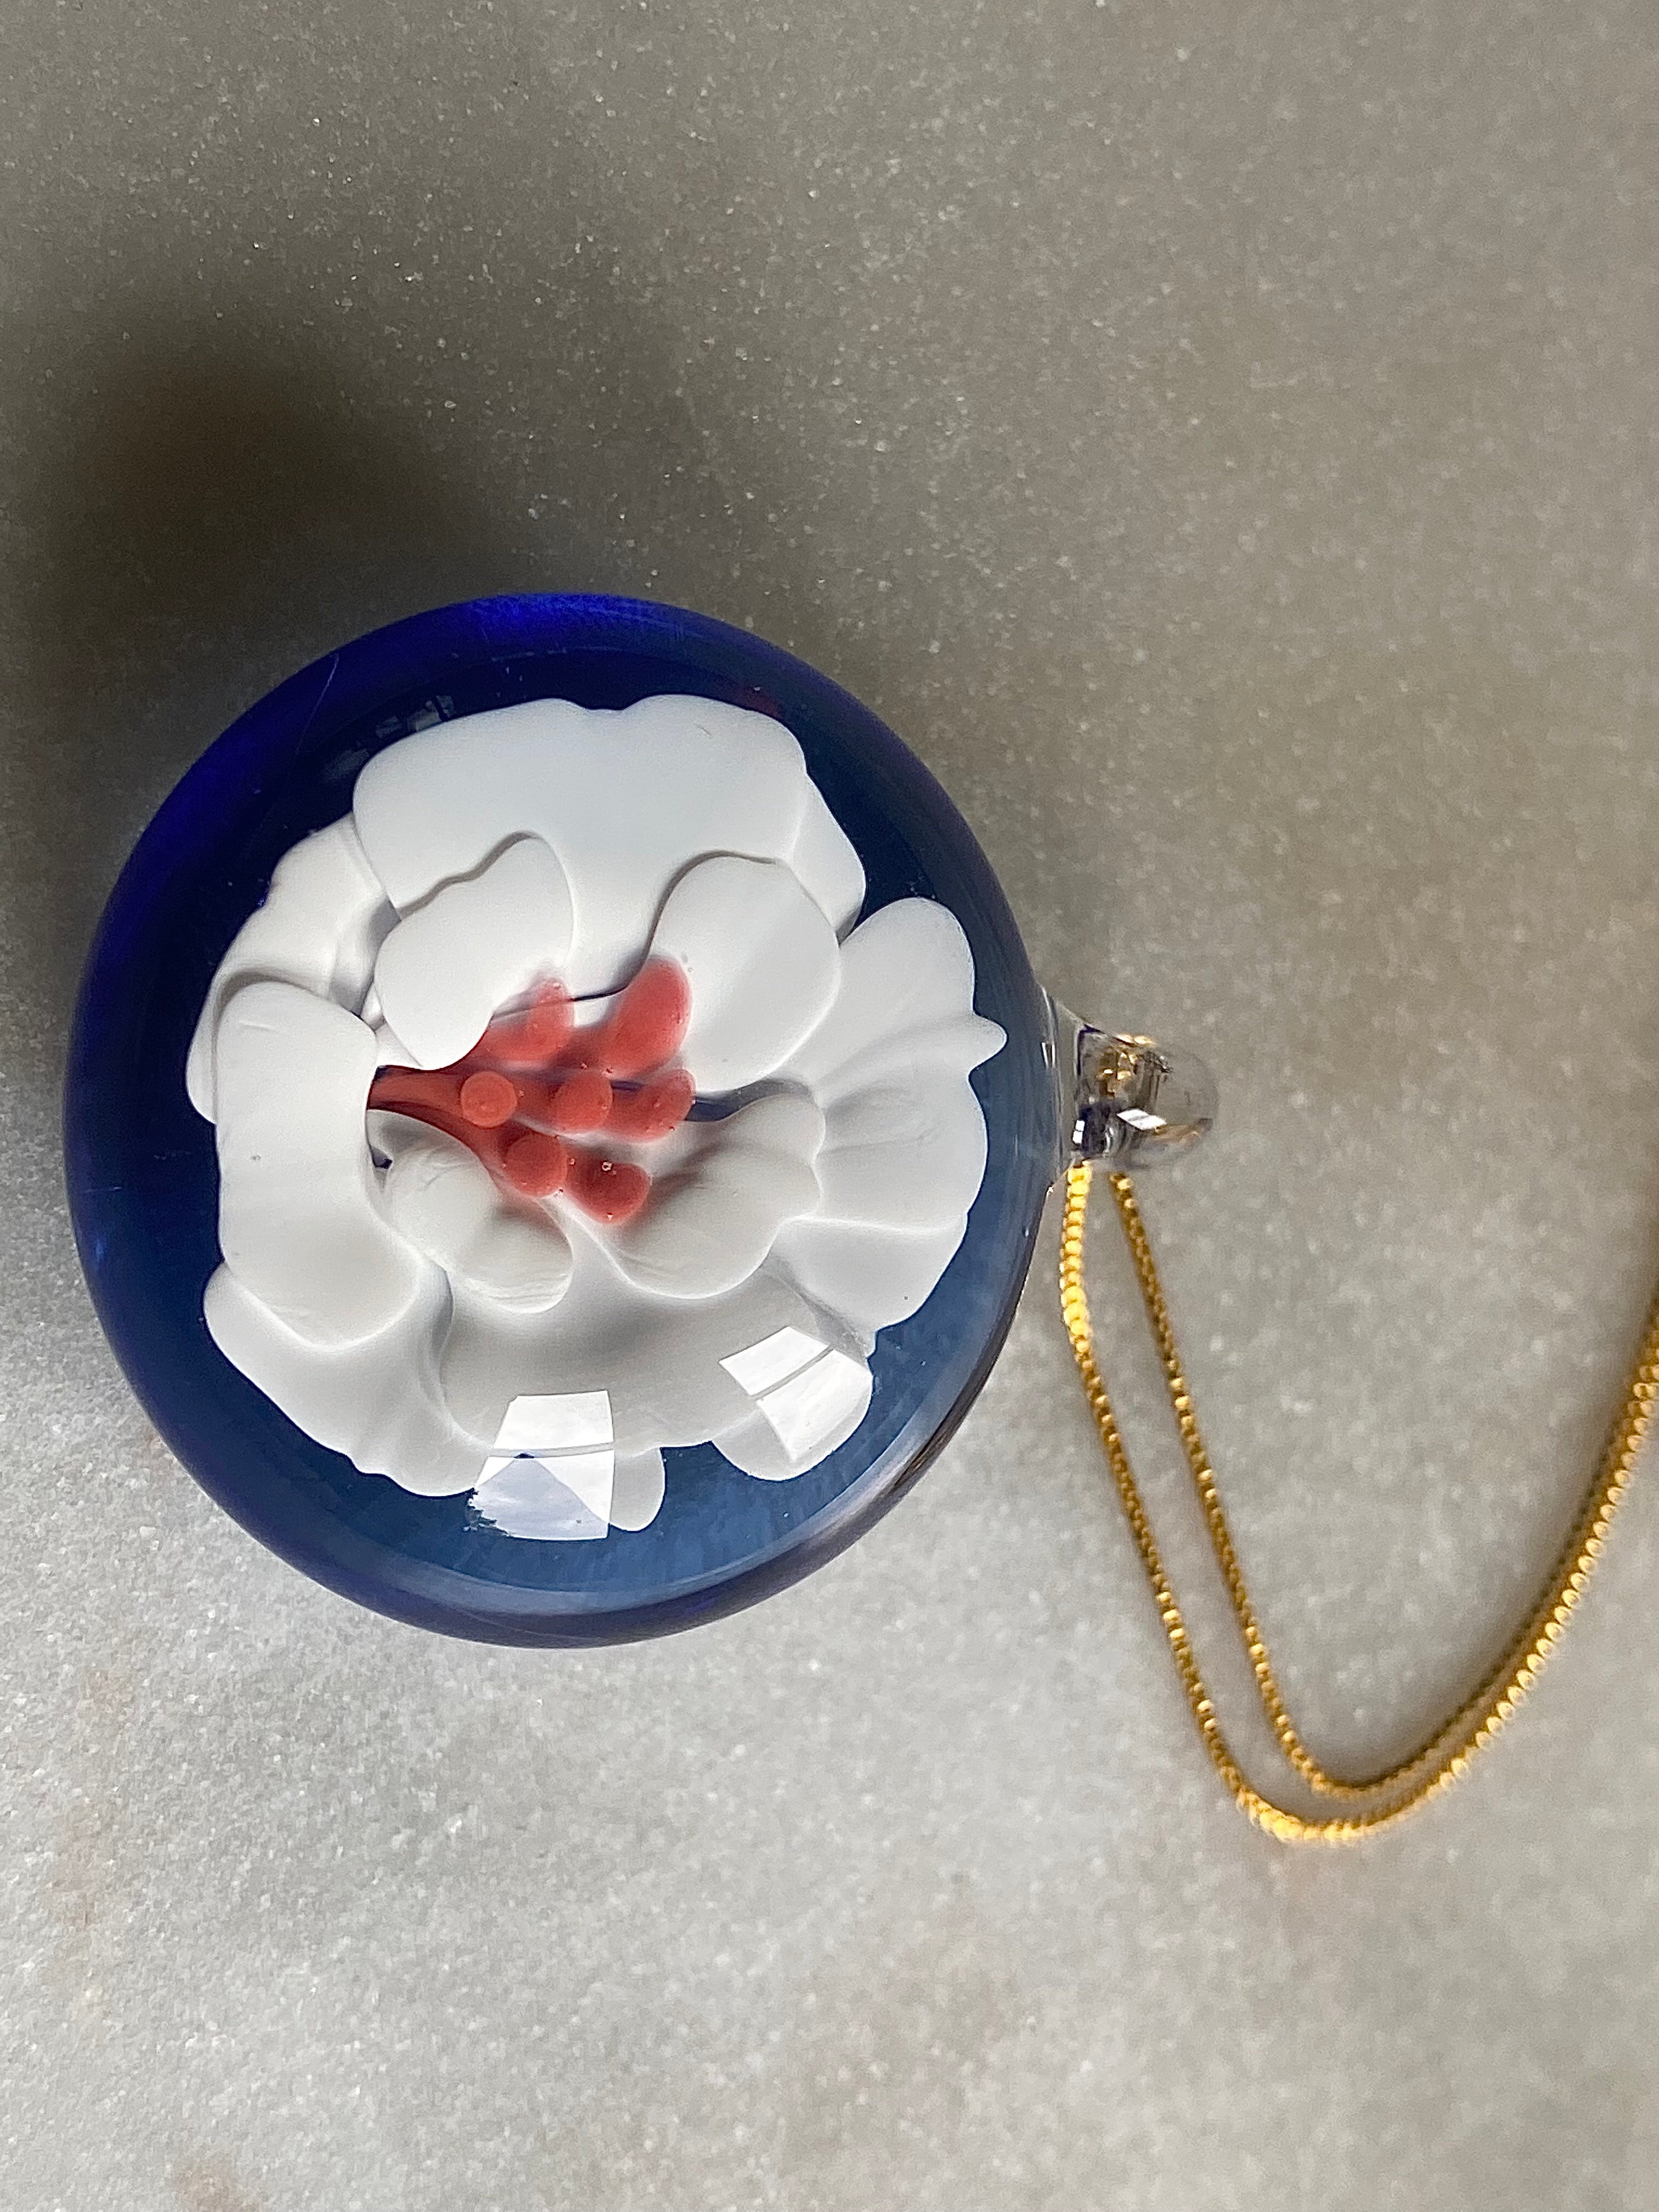 White and Blue Flower Implosion Pendant